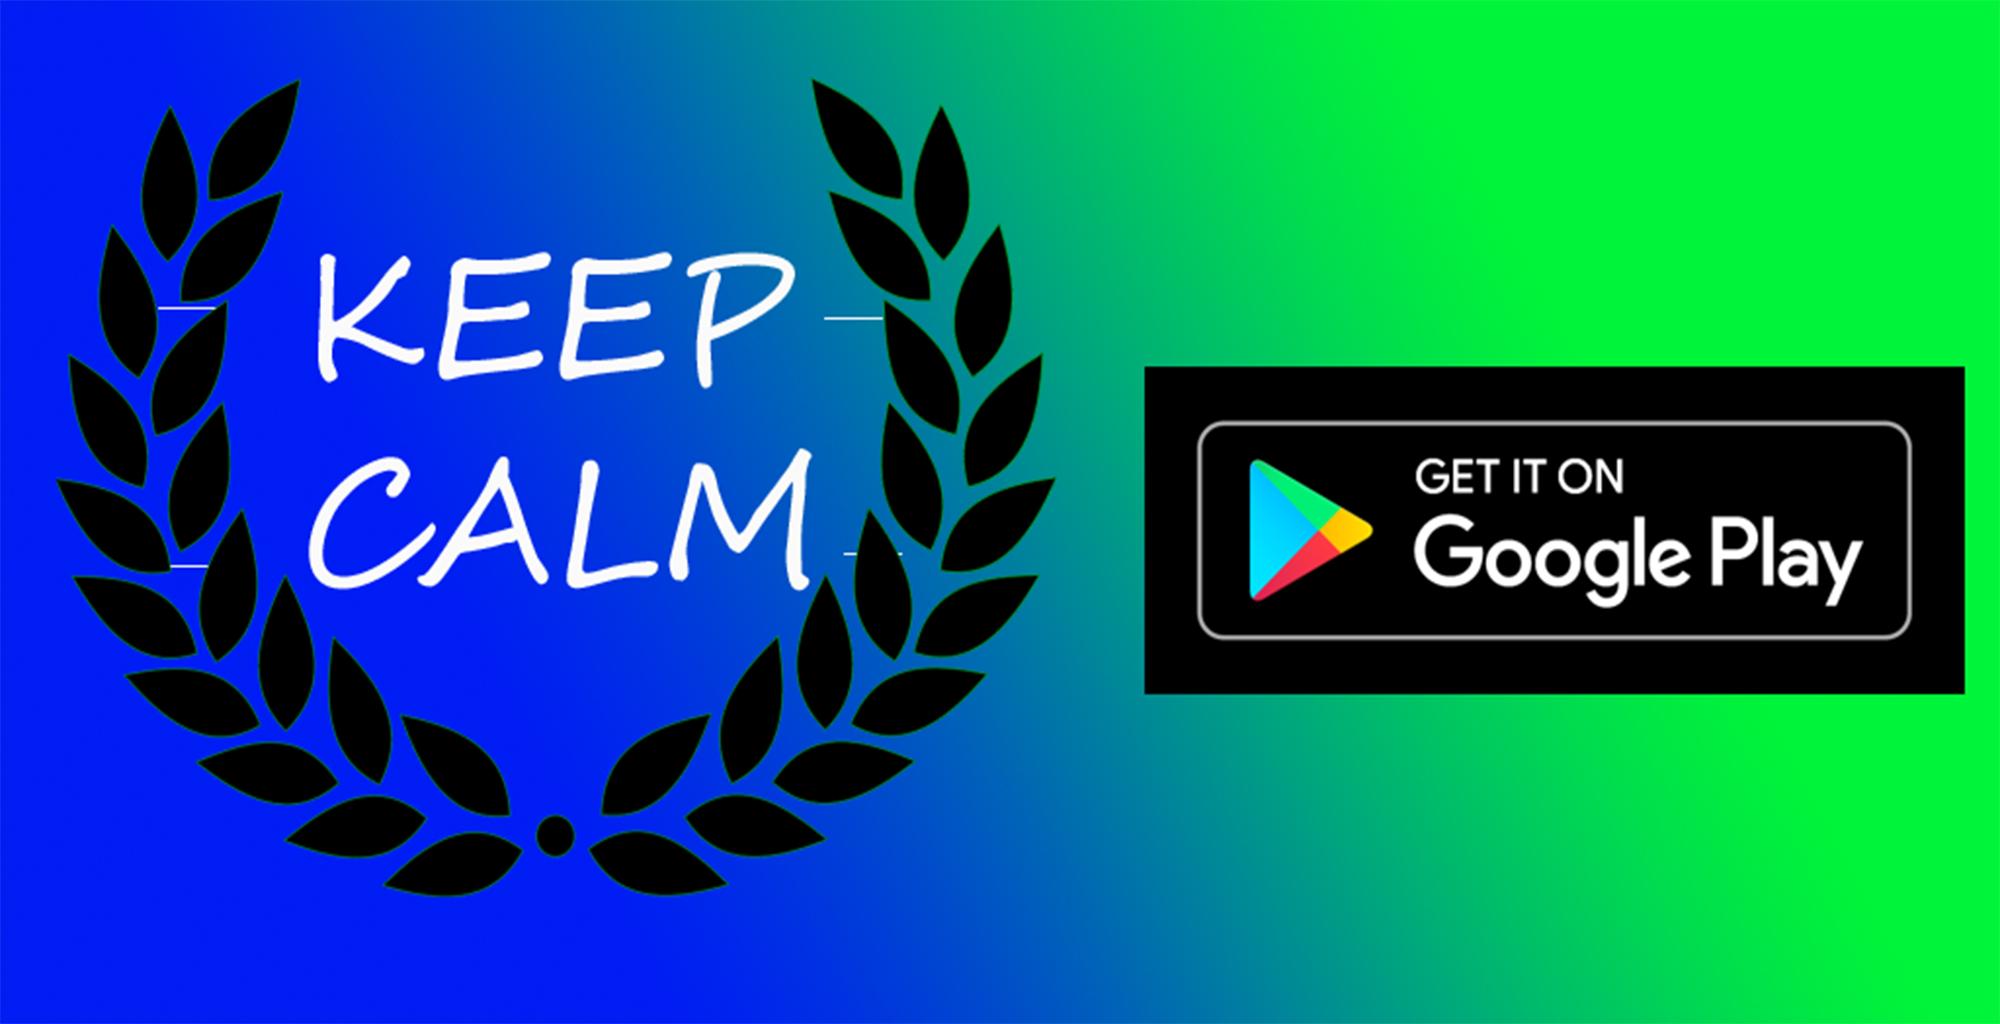 45 HQ Pictures What Is Calm Free App - Calm Meditate Sleep Relax Free App 2020 For Android Apk Download